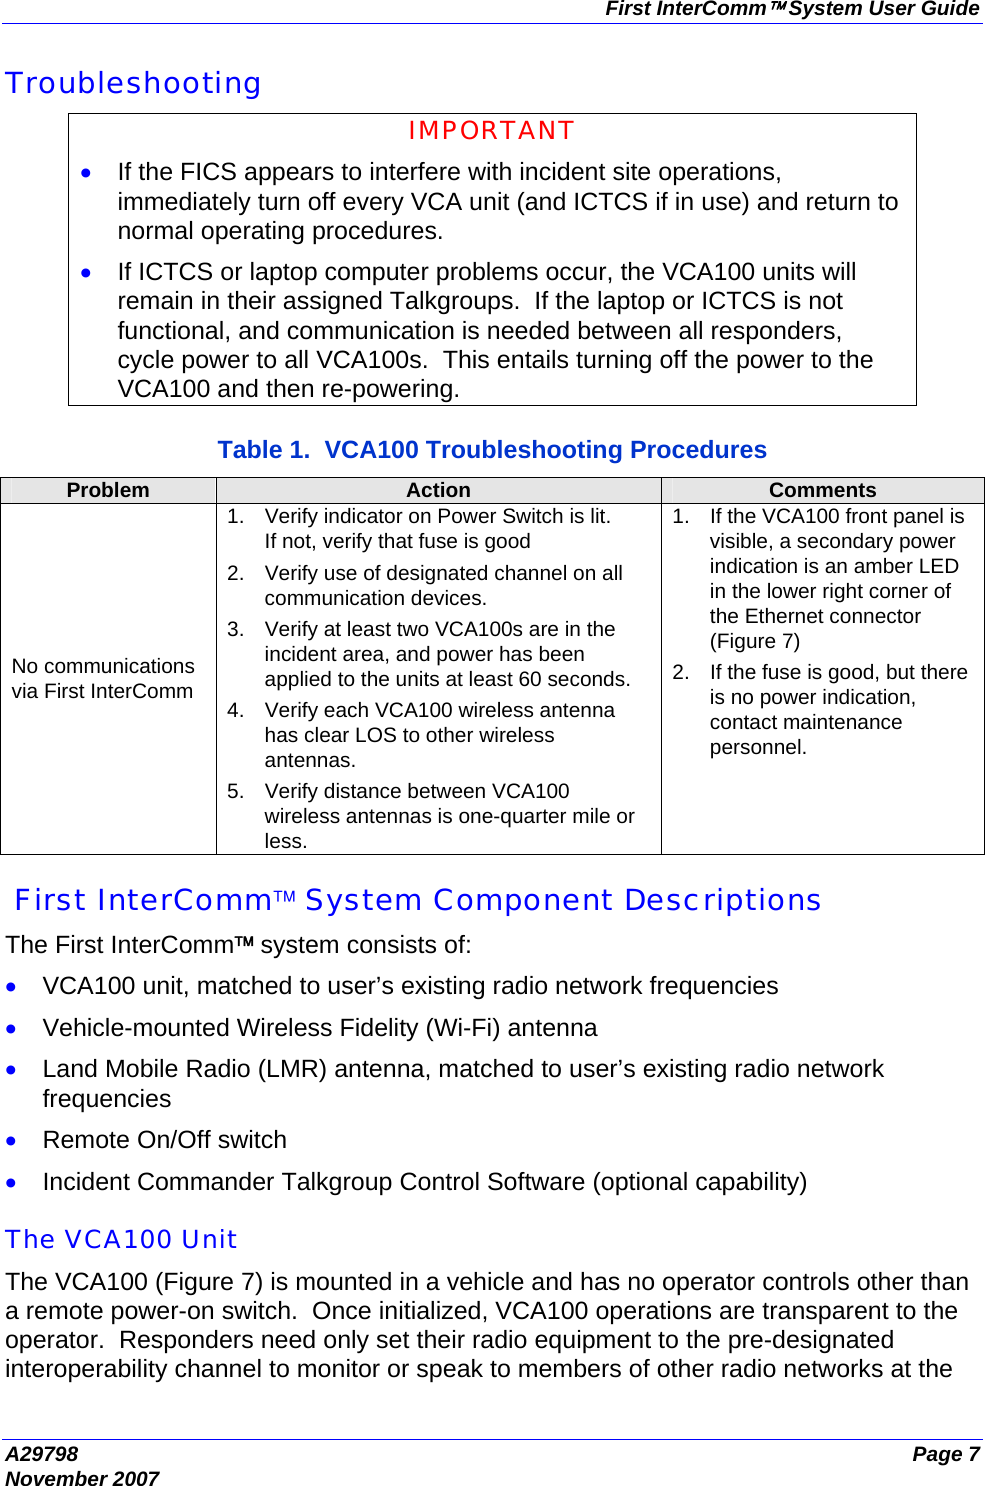 First InterComm™ System User Guide A29798  Page 7 November 2007 Troubleshooting IMPORTANT • If the FICS appears to interfere with incident site operations, immediately turn off every VCA unit (and ICTCS if in use) and return to normal operating procedures. • If ICTCS or laptop computer problems occur, the VCA100 units will remain in their assigned Talkgroups.  If the laptop or ICTCS is not functional, and communication is needed between all responders, cycle power to all VCA100s.  This entails turning off the power to the VCA100 and then re-powering.  Table 1.  VCA100 Troubleshooting Procedures Problem  Action  Comments No communications via First InterComm 1.  Verify indicator on Power Switch is lit. If not, verify that fuse is good  2.  Verify use of designated channel on all communication devices. 3.  Verify at least two VCA100s are in the incident area, and power has been applied to the units at least 60 seconds. 4.  Verify each VCA100 wireless antenna has clear LOS to other wireless antennas. 5.  Verify distance between VCA100 wireless antennas is one-quarter mile or less. 1.  If the VCA100 front panel is visible, a secondary power indication is an amber LED in the lower right corner of the Ethernet connector (Figure 7) 2.  If the fuse is good, but there is no power indication, contact maintenance personnel.   First InterComm™ System Component Descriptions The First InterComm™ system consists of: • VCA100 unit, matched to user’s existing radio network frequencies • Vehicle-mounted Wireless Fidelity (Wi-Fi) antenna • Land Mobile Radio (LMR) antenna, matched to user’s existing radio network frequencies • Remote On/Off switch • Incident Commander Talkgroup Control Software (optional capability)  The VCA100 Unit The VCA100 (Figure 7) is mounted in a vehicle and has no operator controls other than a remote power-on switch.  Once initialized, VCA100 operations are transparent to the operator.  Responders need only set their radio equipment to the pre-designated interoperability channel to monitor or speak to members of other radio networks at the 